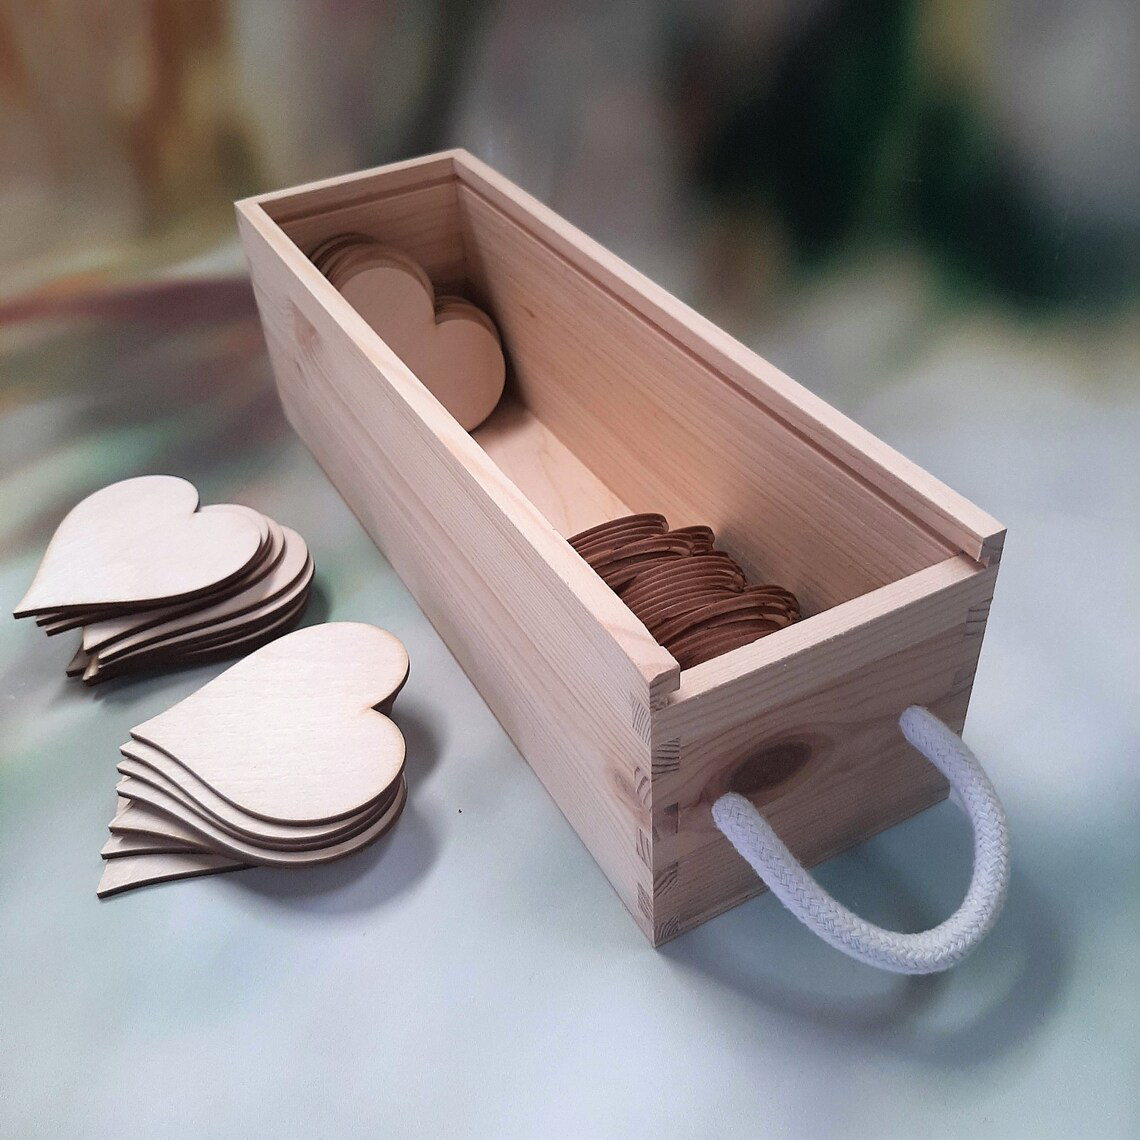 Wedding Wooden Guestbook Box with 60 Wooden Hearts